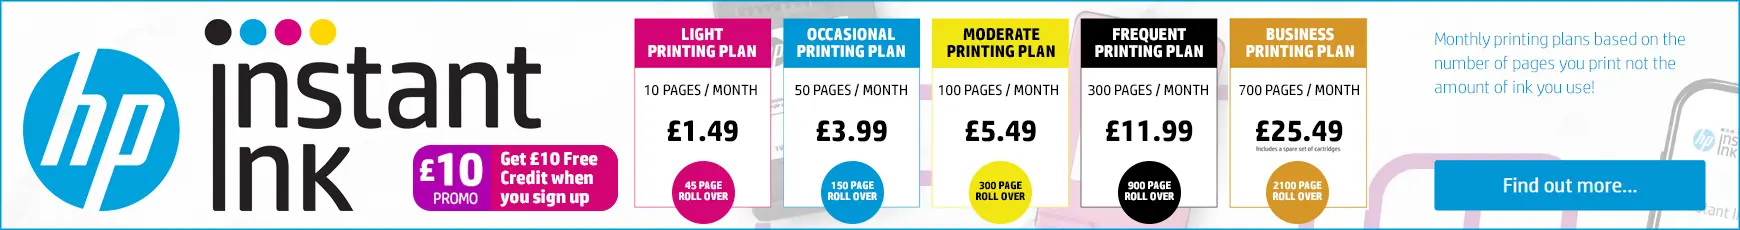 Find out more about HP Instant Ink